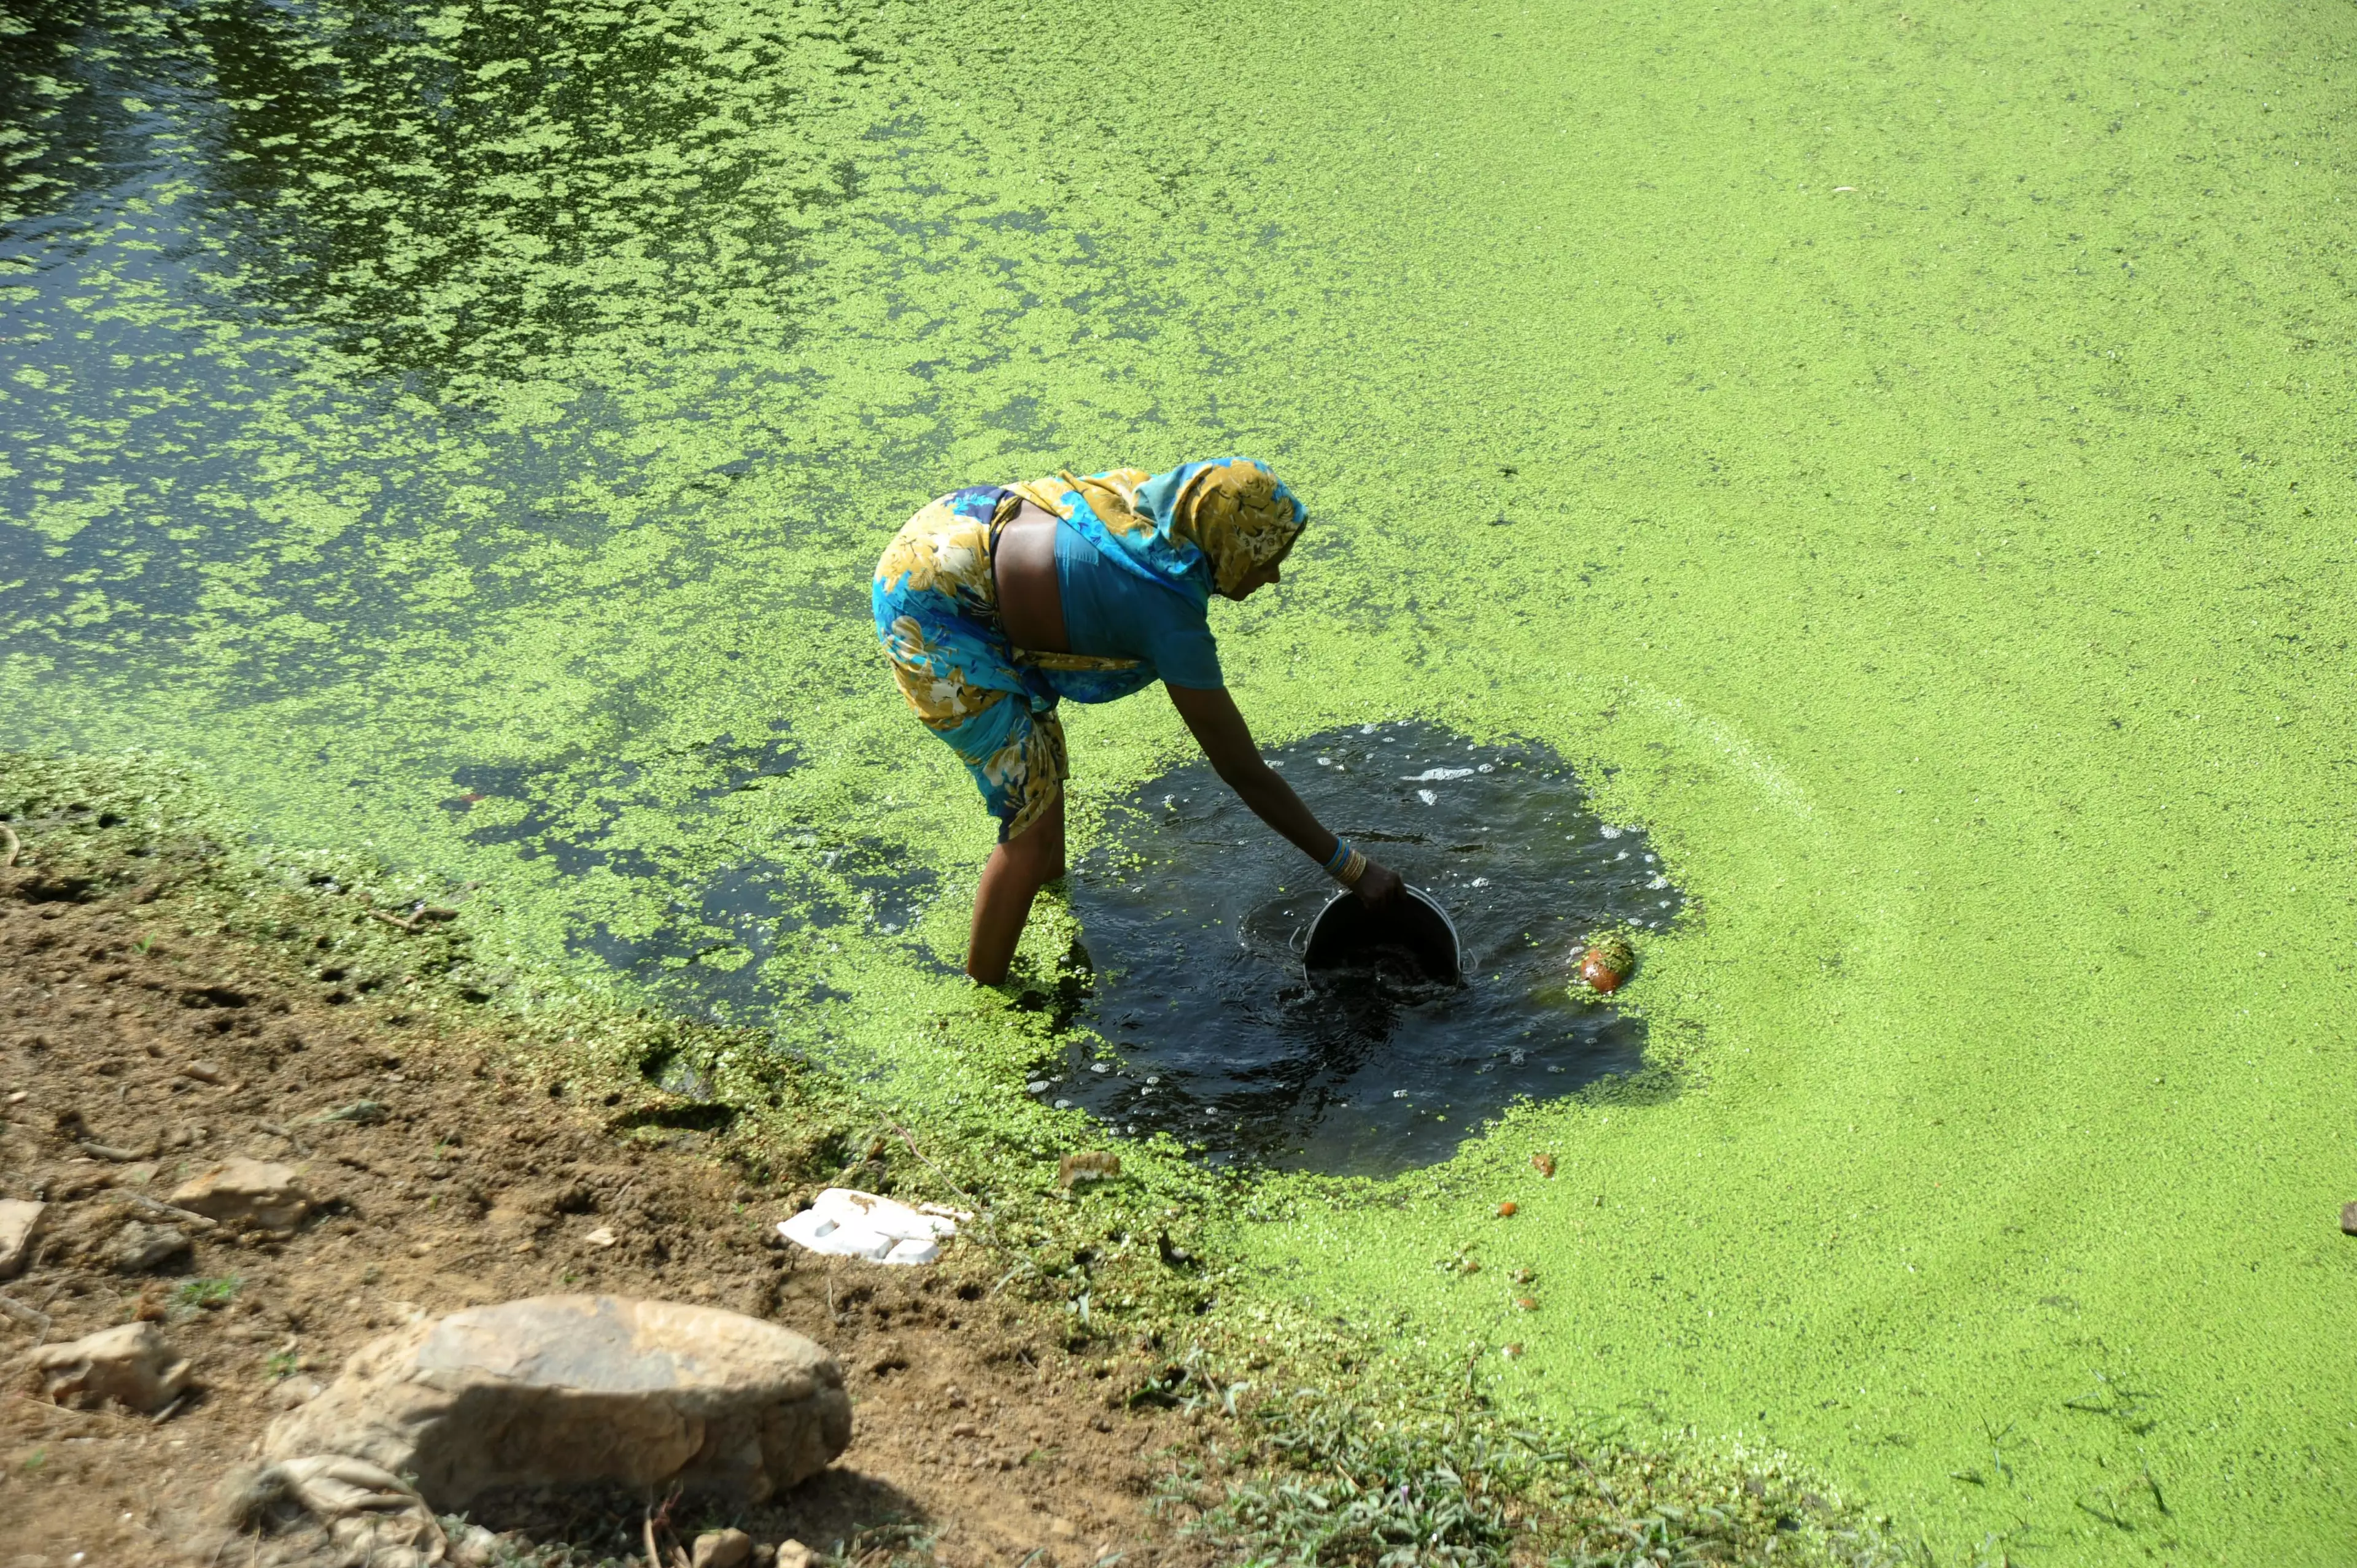 One of the many environmental issues plaguing India